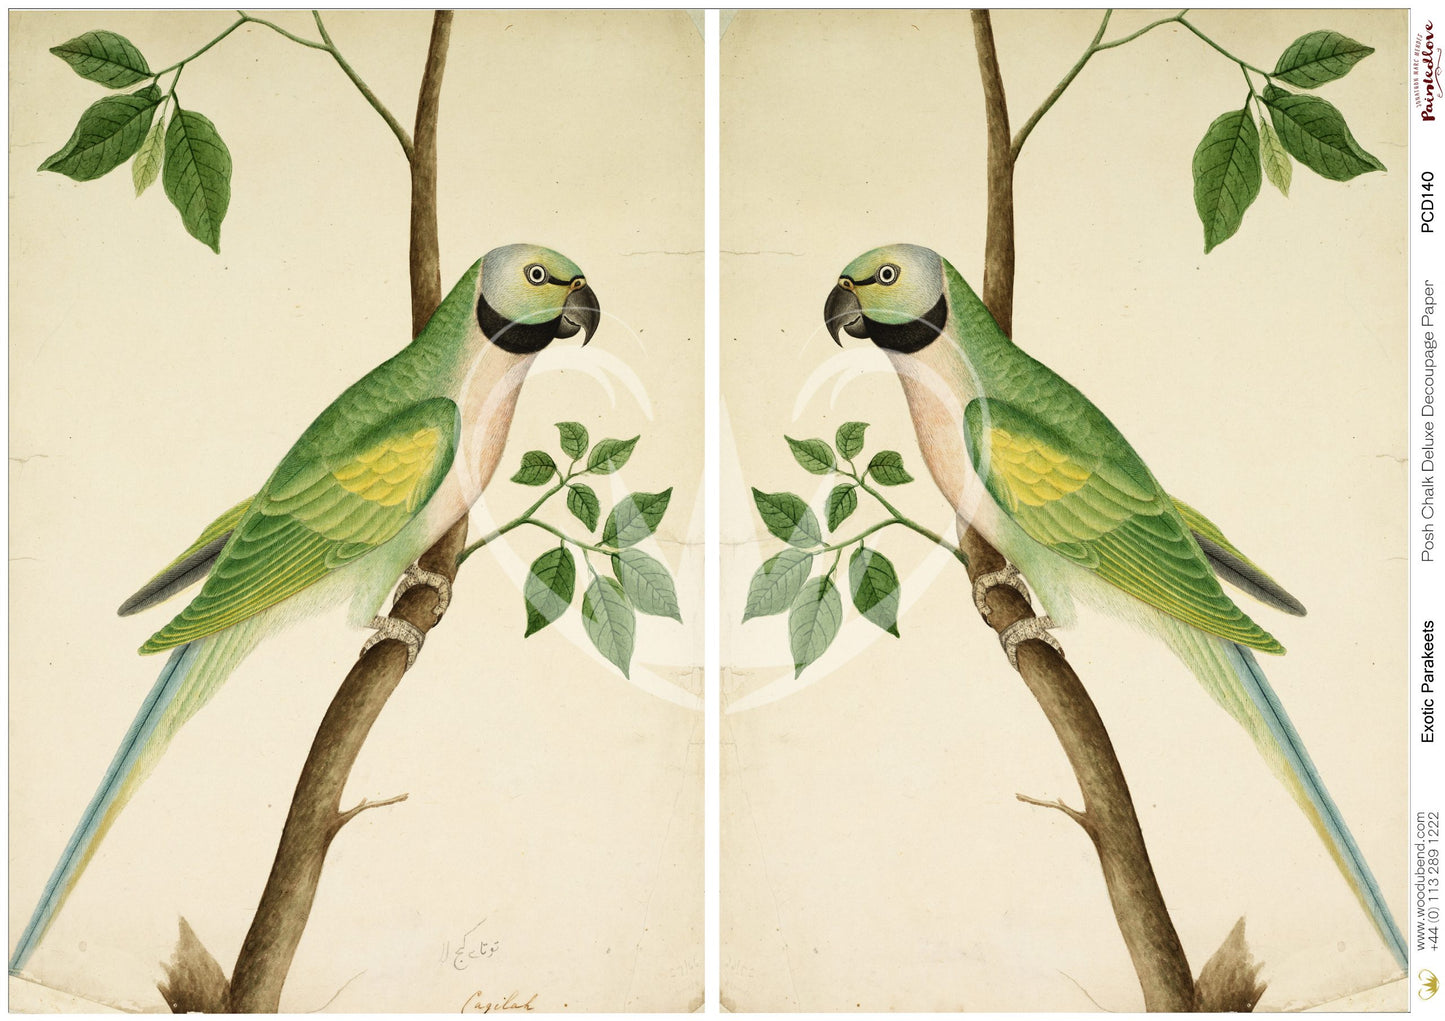 Posh Chalk Deluxe Decoupage from The House of Mendes Exotic Parakeets